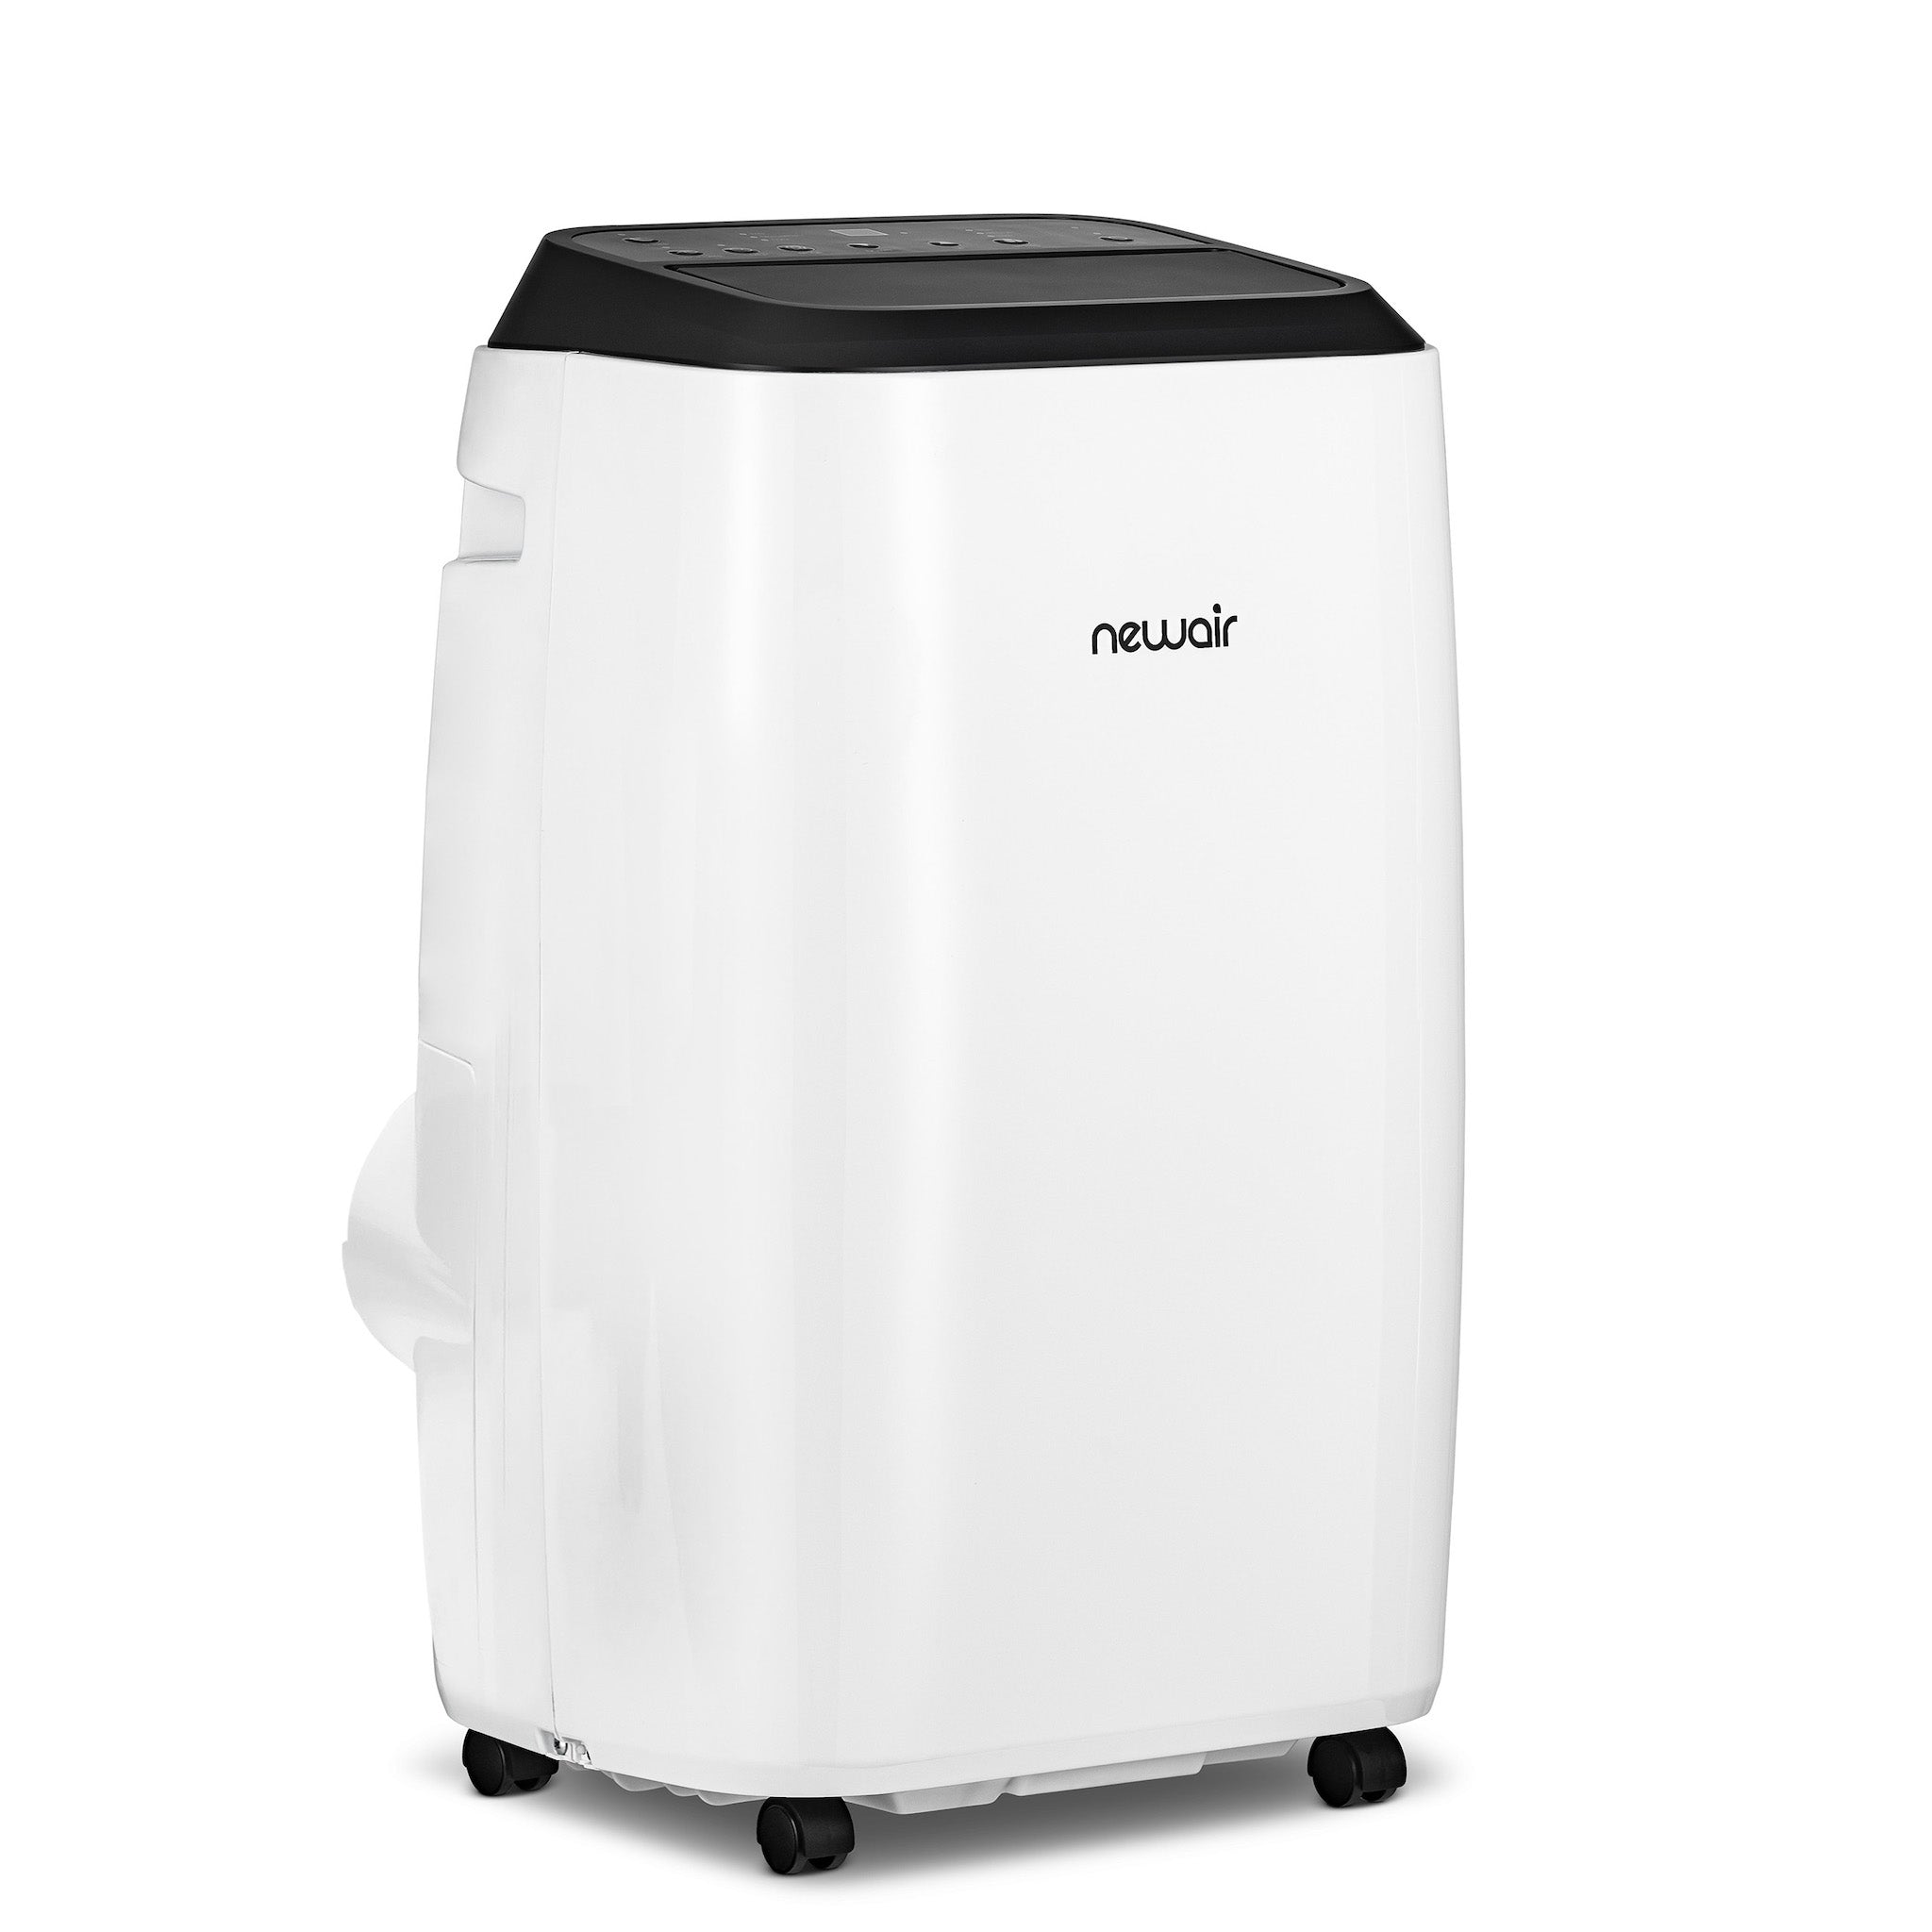 Portable Air Conditioners for sale in West Sacramento, California